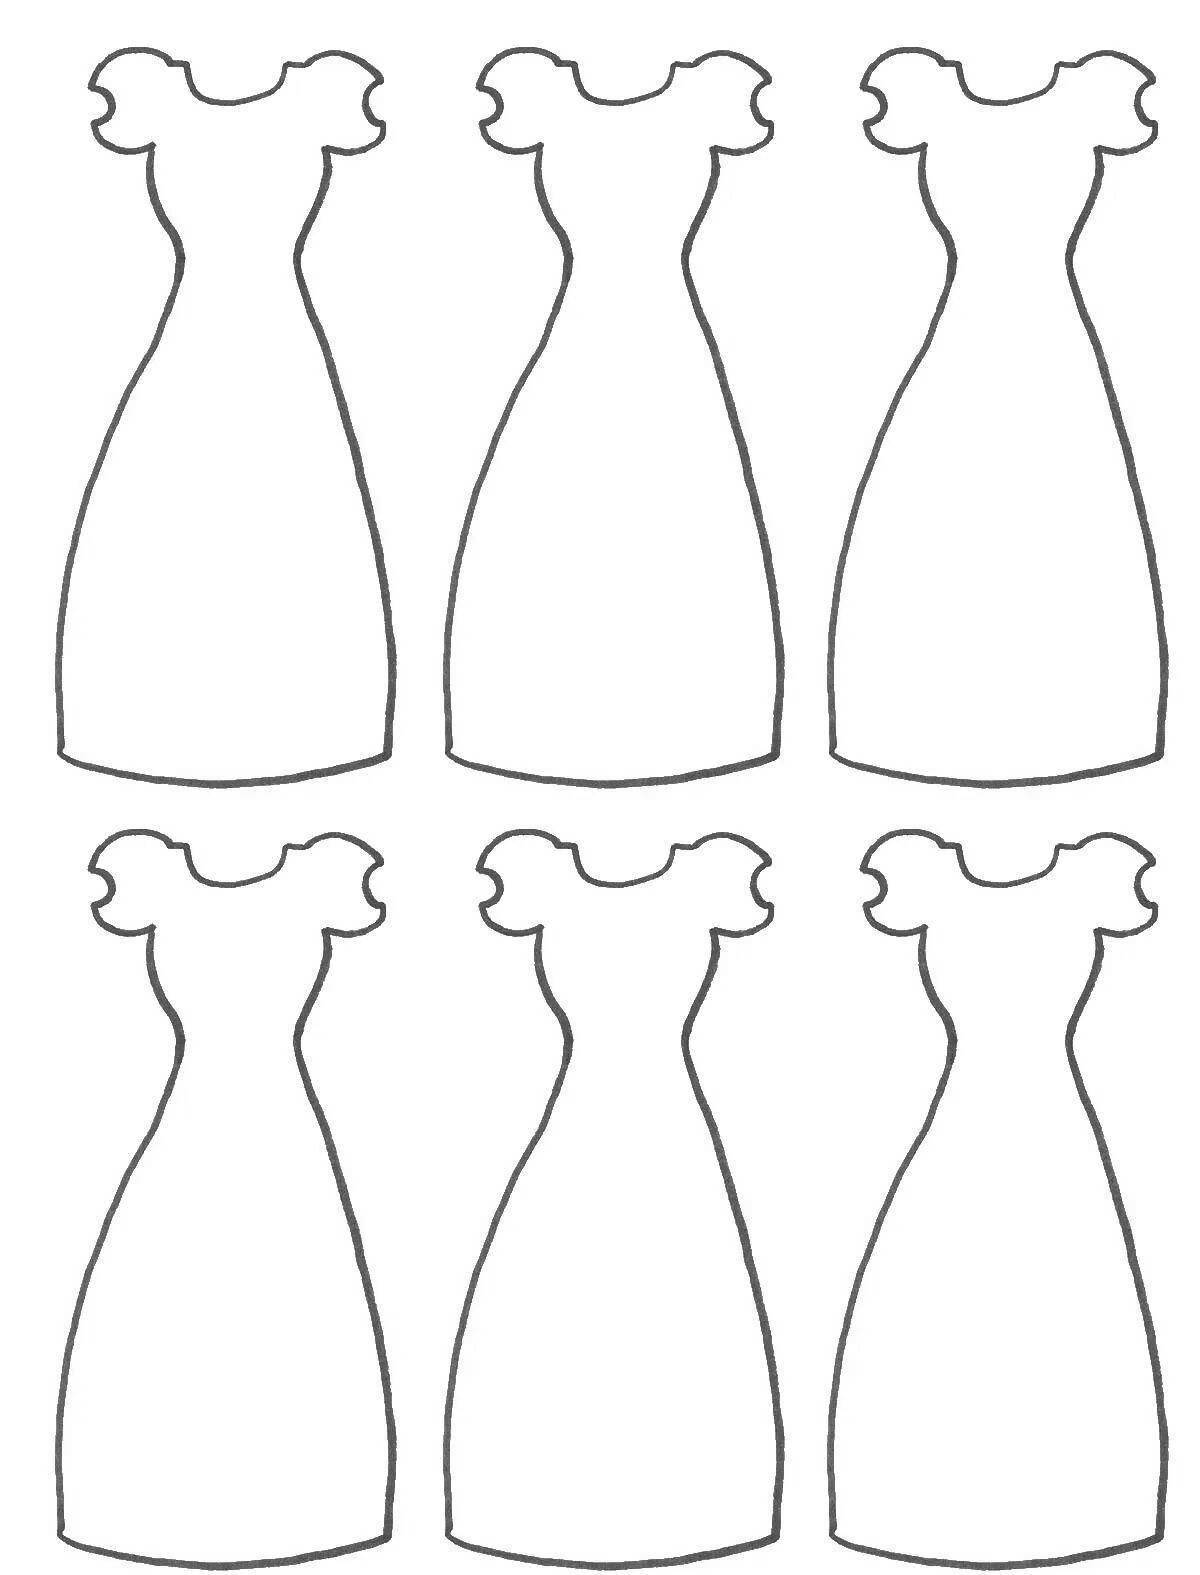 Coloring page with bright dress pattern